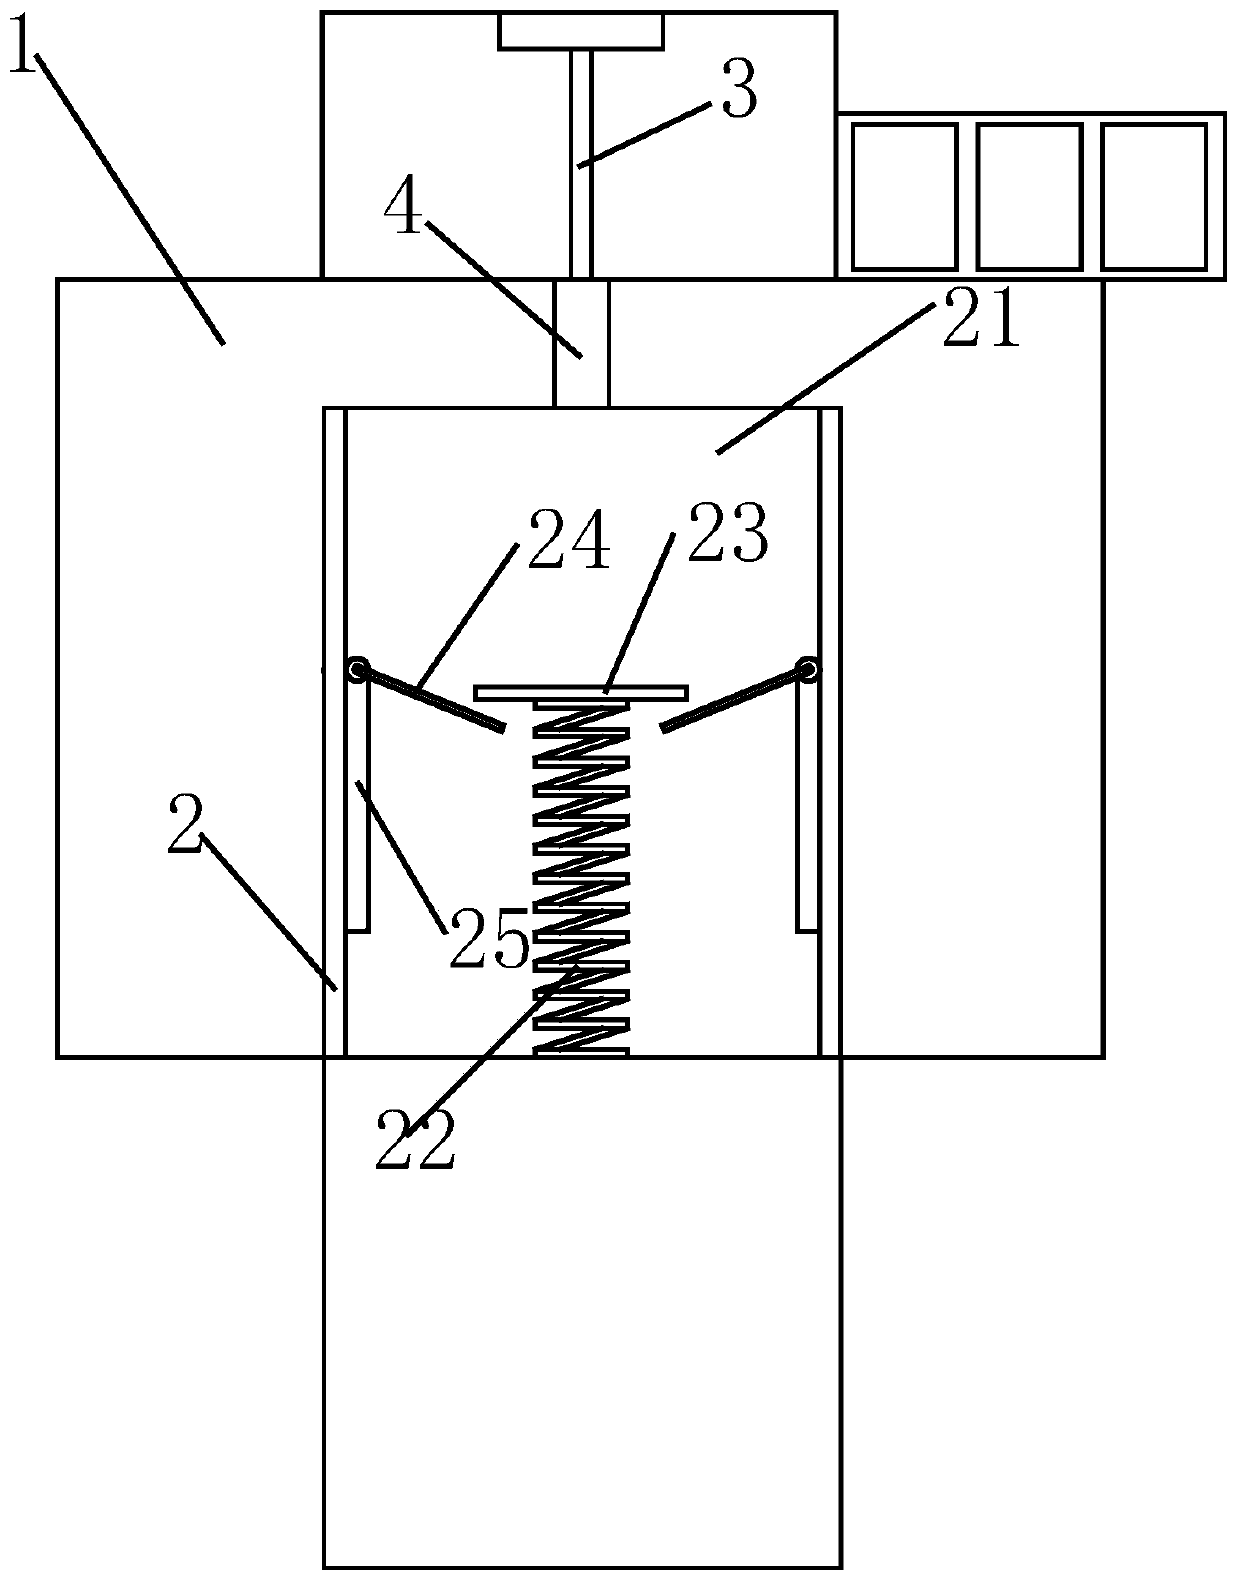 Electromagnetic valve for controlling flow